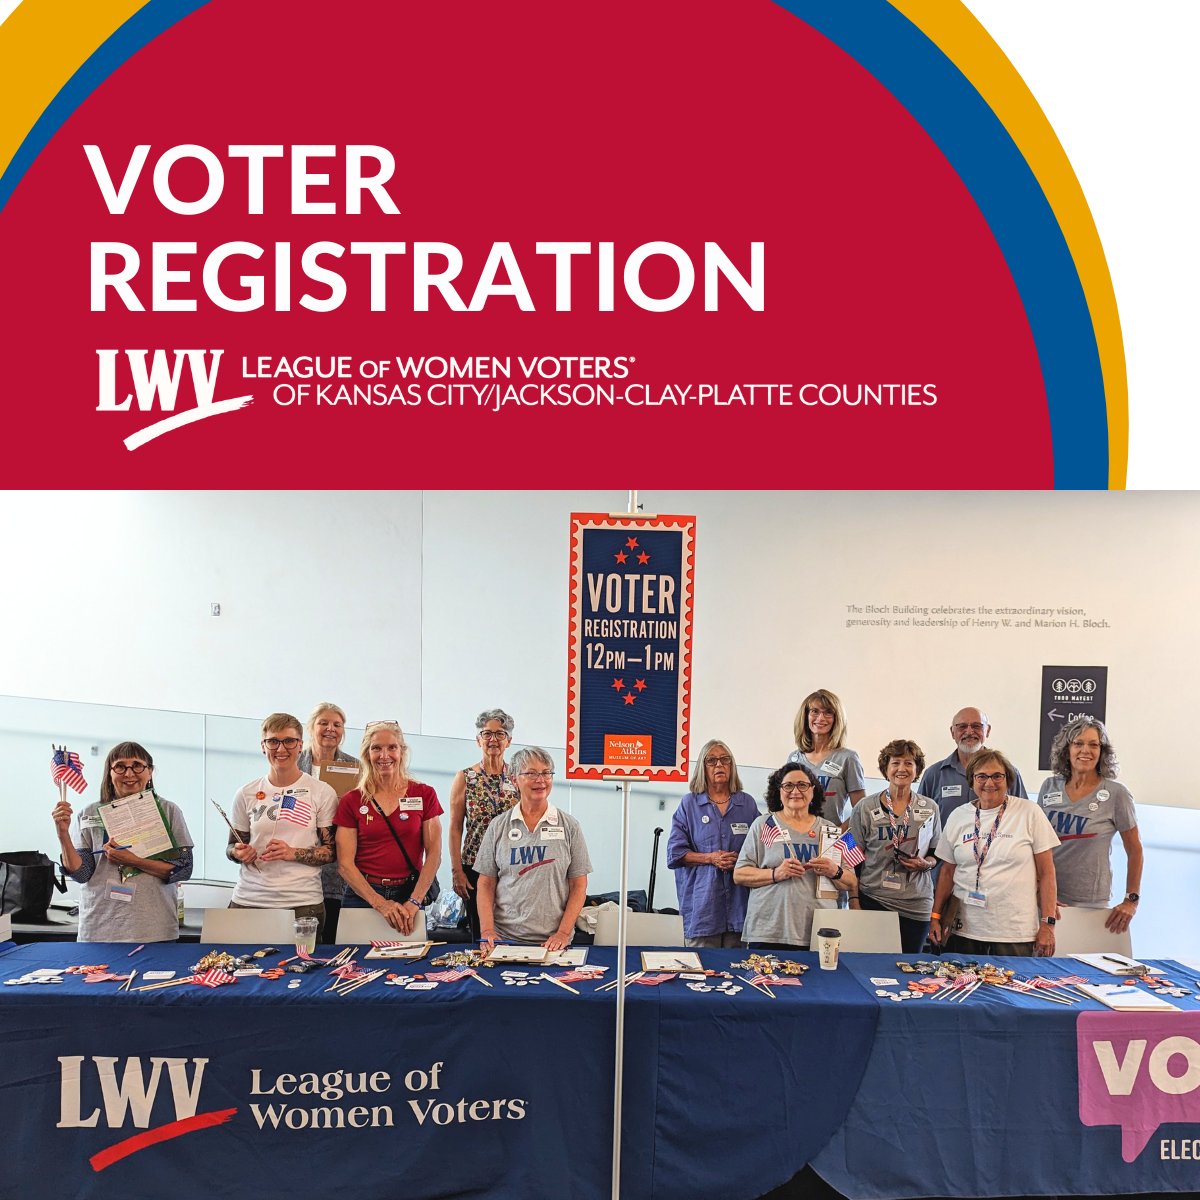 LWVKC's Voter Registration volunteers 𝐫𝐞𝐠𝐢𝐬𝐭𝐞𝐫𝐞𝐝 𝟔𝟗 𝐧𝐞𝐰 𝐯𝐨𝐭𝐞𝐫𝐬 after a naturalization ceremony hosted by the Nelson-Atkins Museum on June 22, 2023. 🇺🇸✍️🗳 #voterregistration #newcitizens #naturalizationceremony #LWVKC